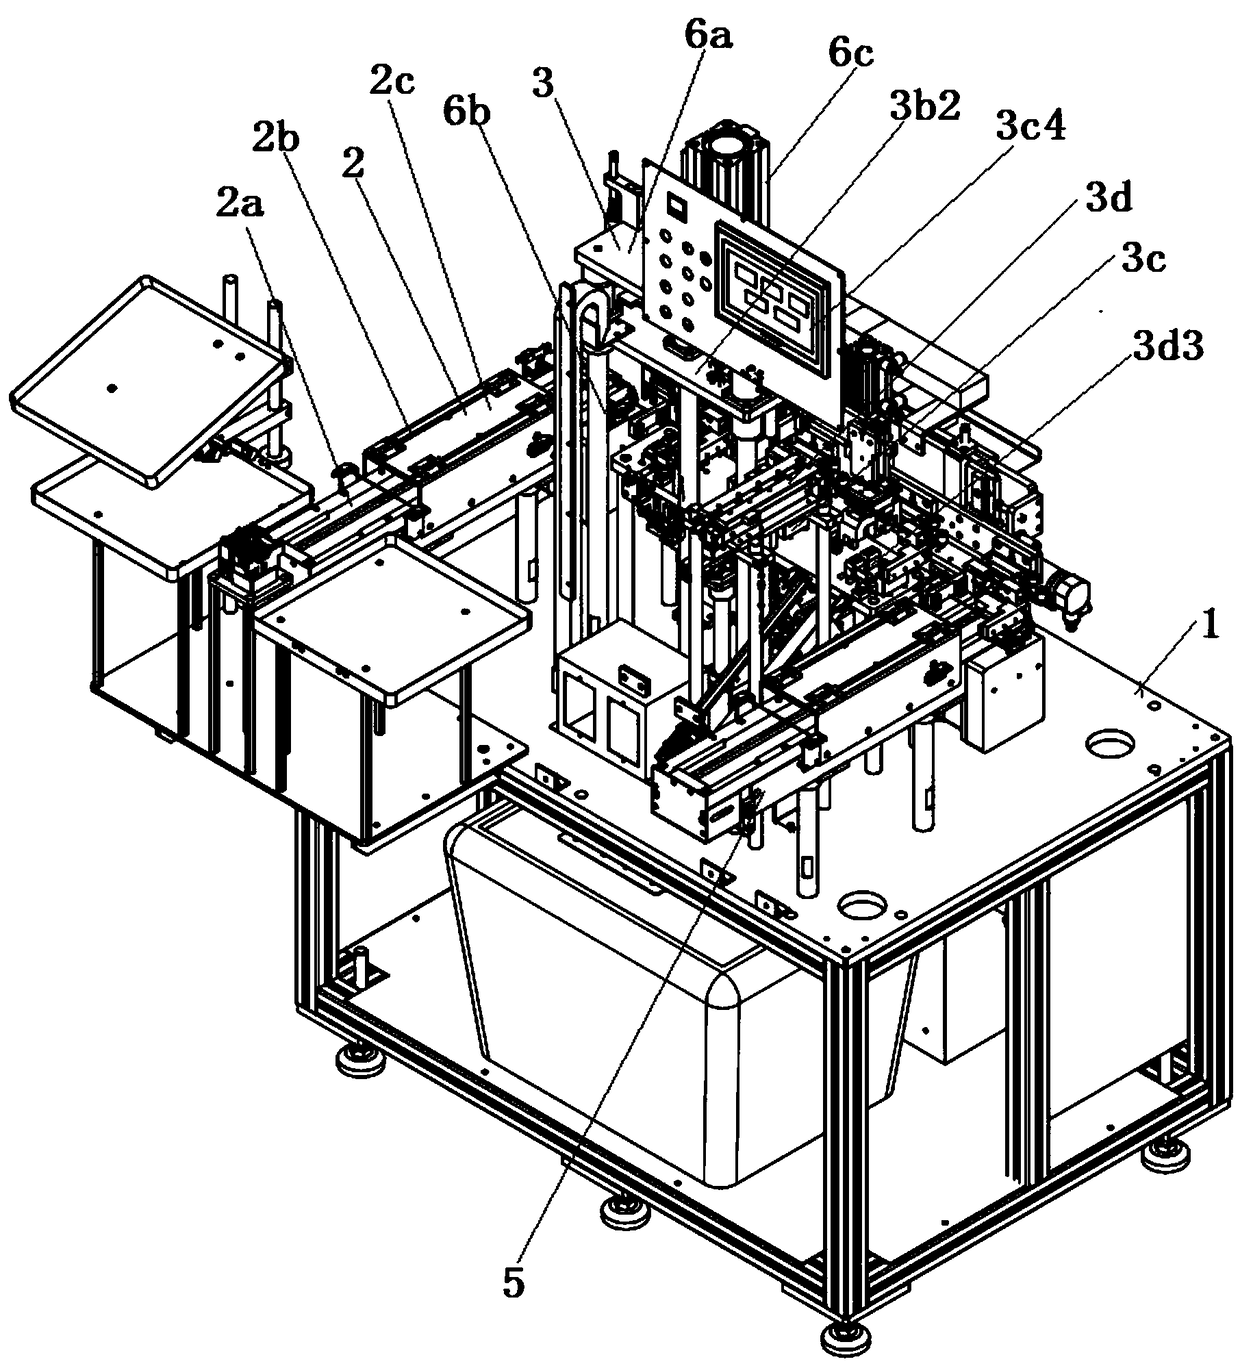 Hardware assembled product assembly inspection device